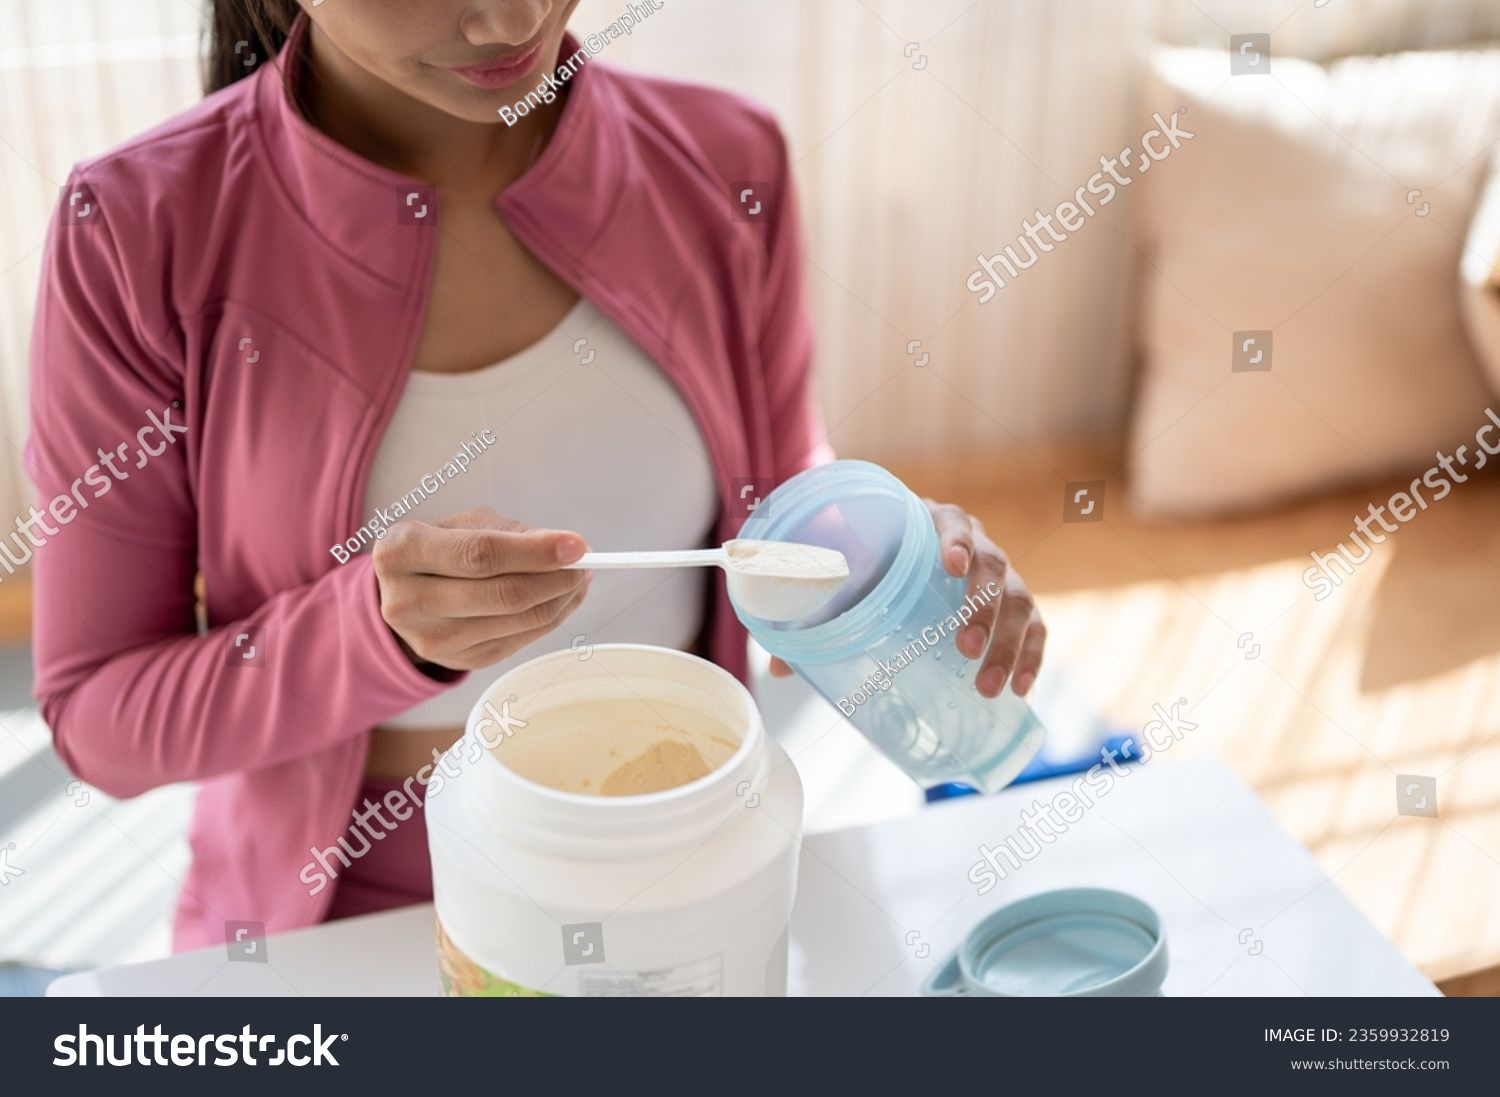 Close-up image of a healthy and fit Asian woman in sportswear making her protein shake after a workout at home. Drink supplements, high-nutrition drinks, diet, and muscle-building #2359932819